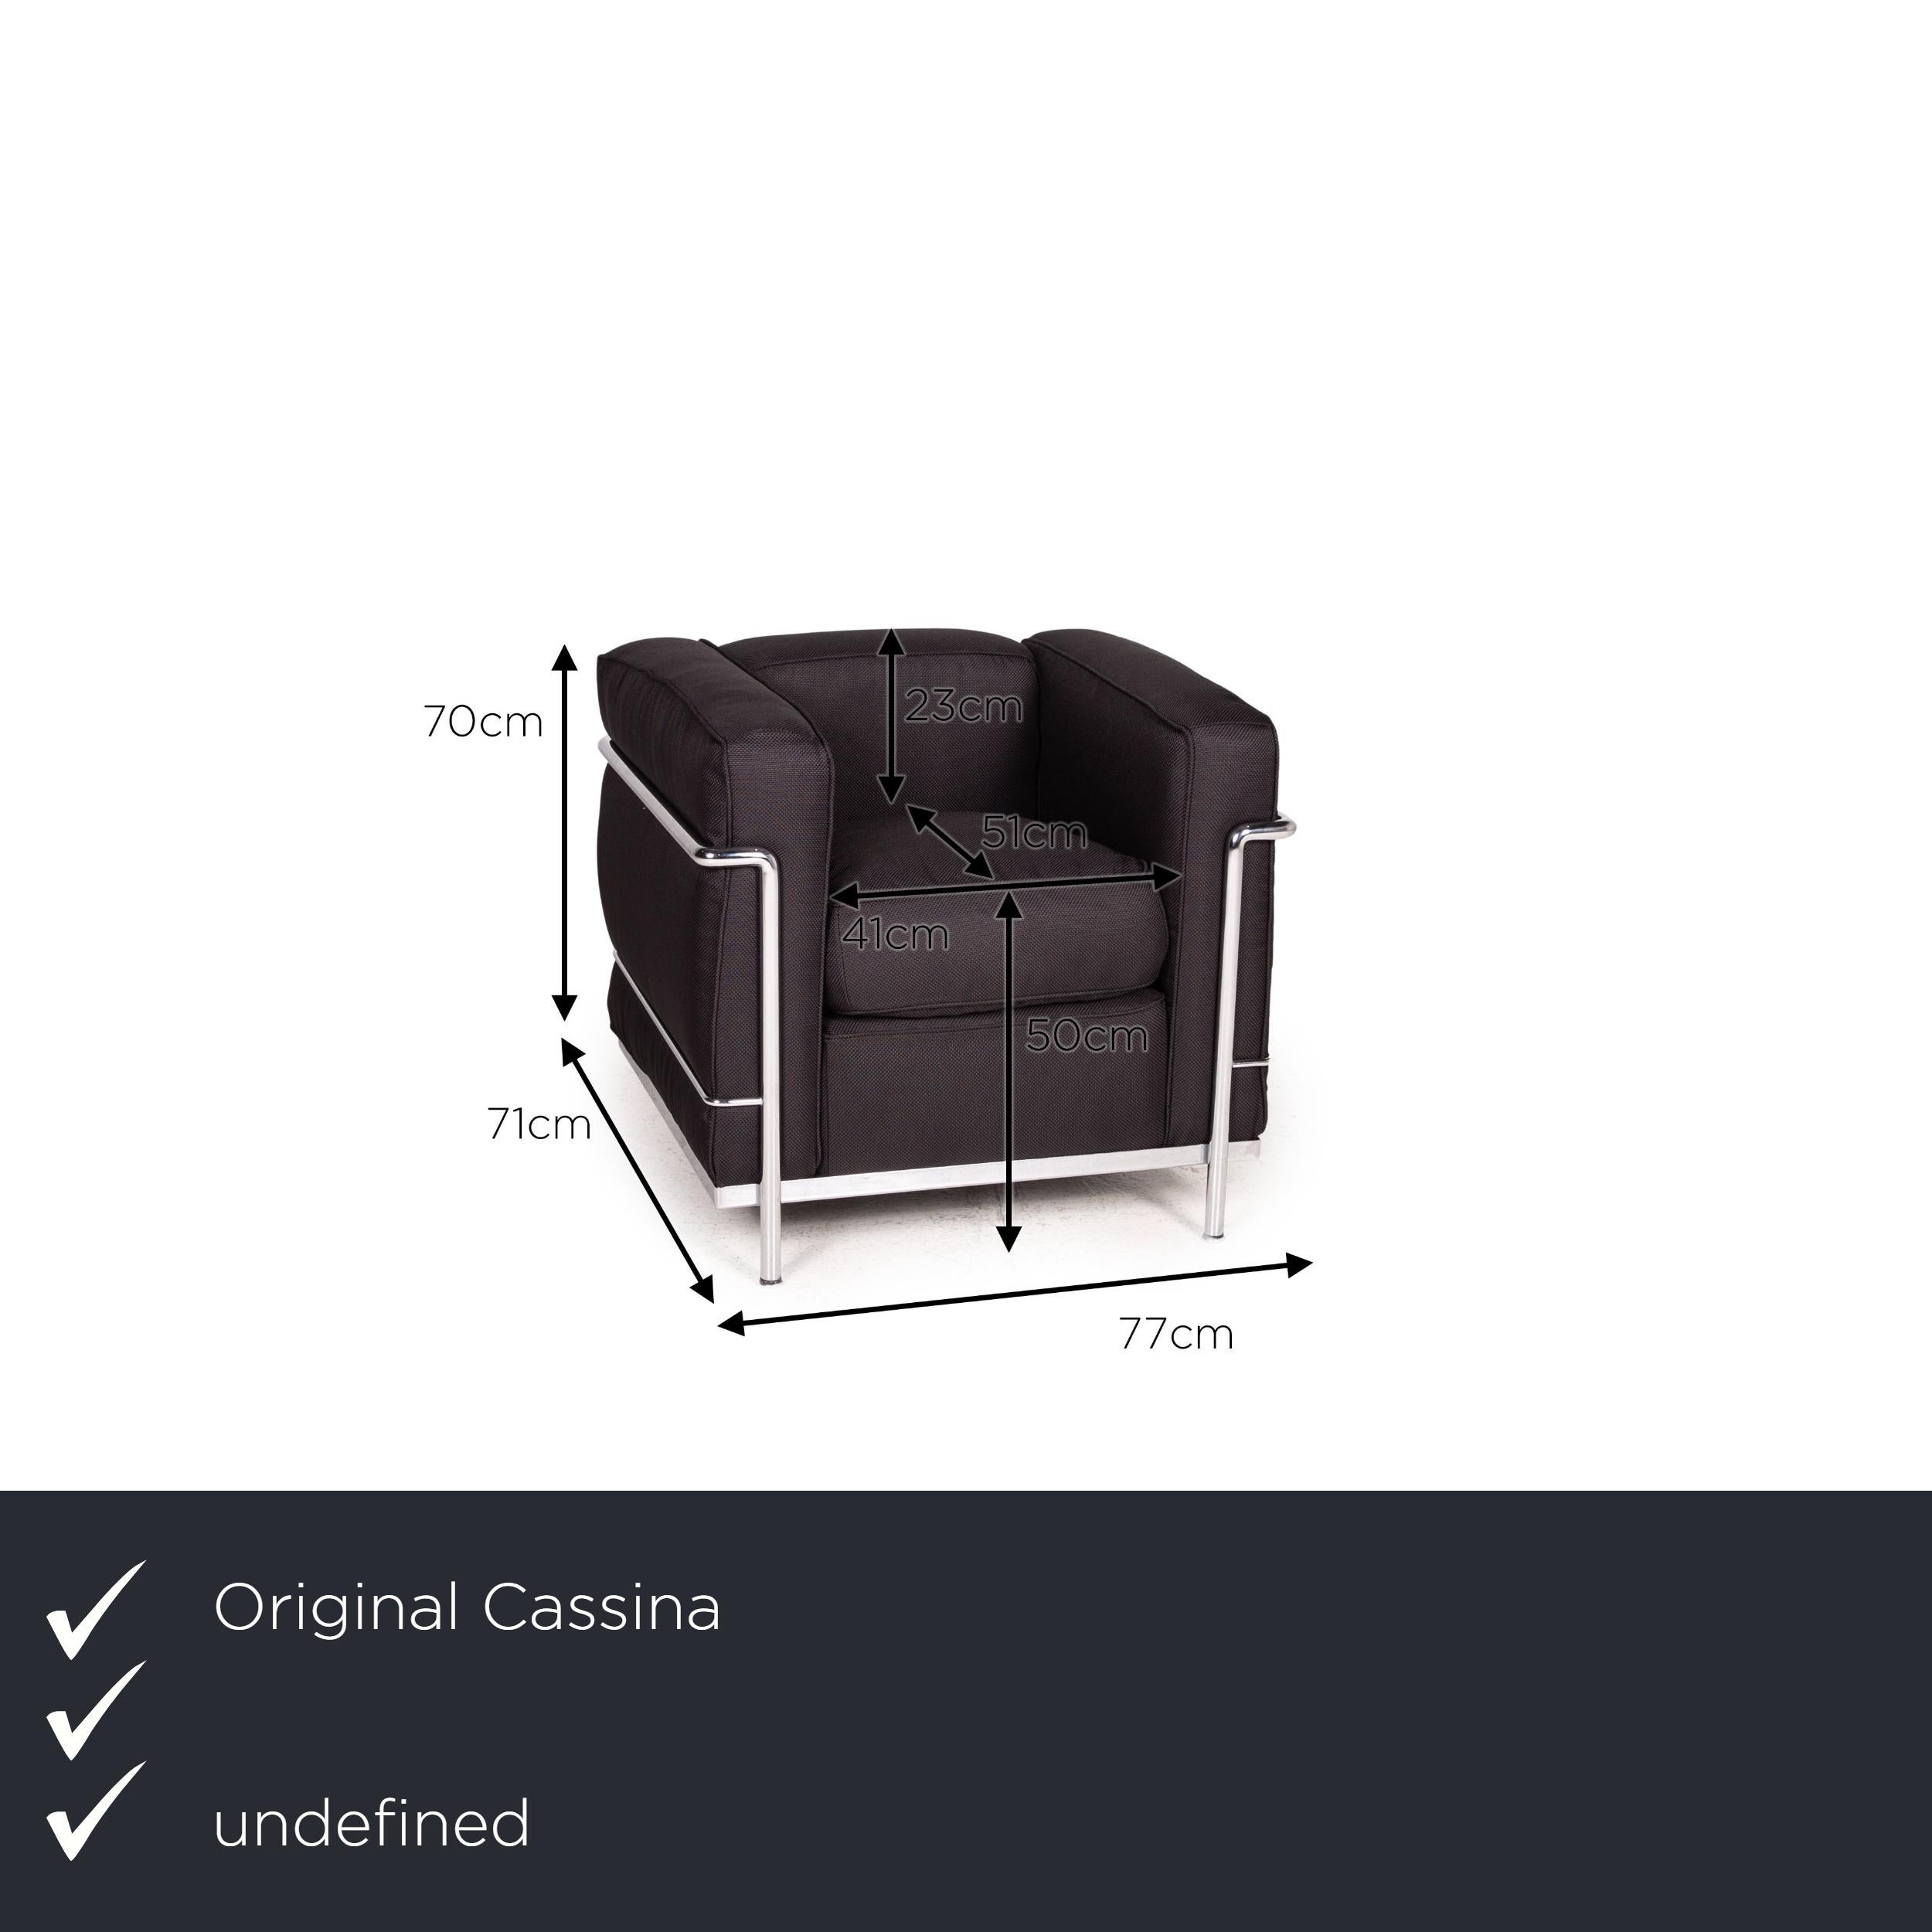 We present to you a Cassina Le Corbusier LC 2 fabric armchair set black.
 

 Product measurements in centimeters:
 

Depth: 71
Width: 77
Height: 70
Seat height: 50
Rest height: 70
Seat depth: 51
Seat width: 41
Back height: 23.
 